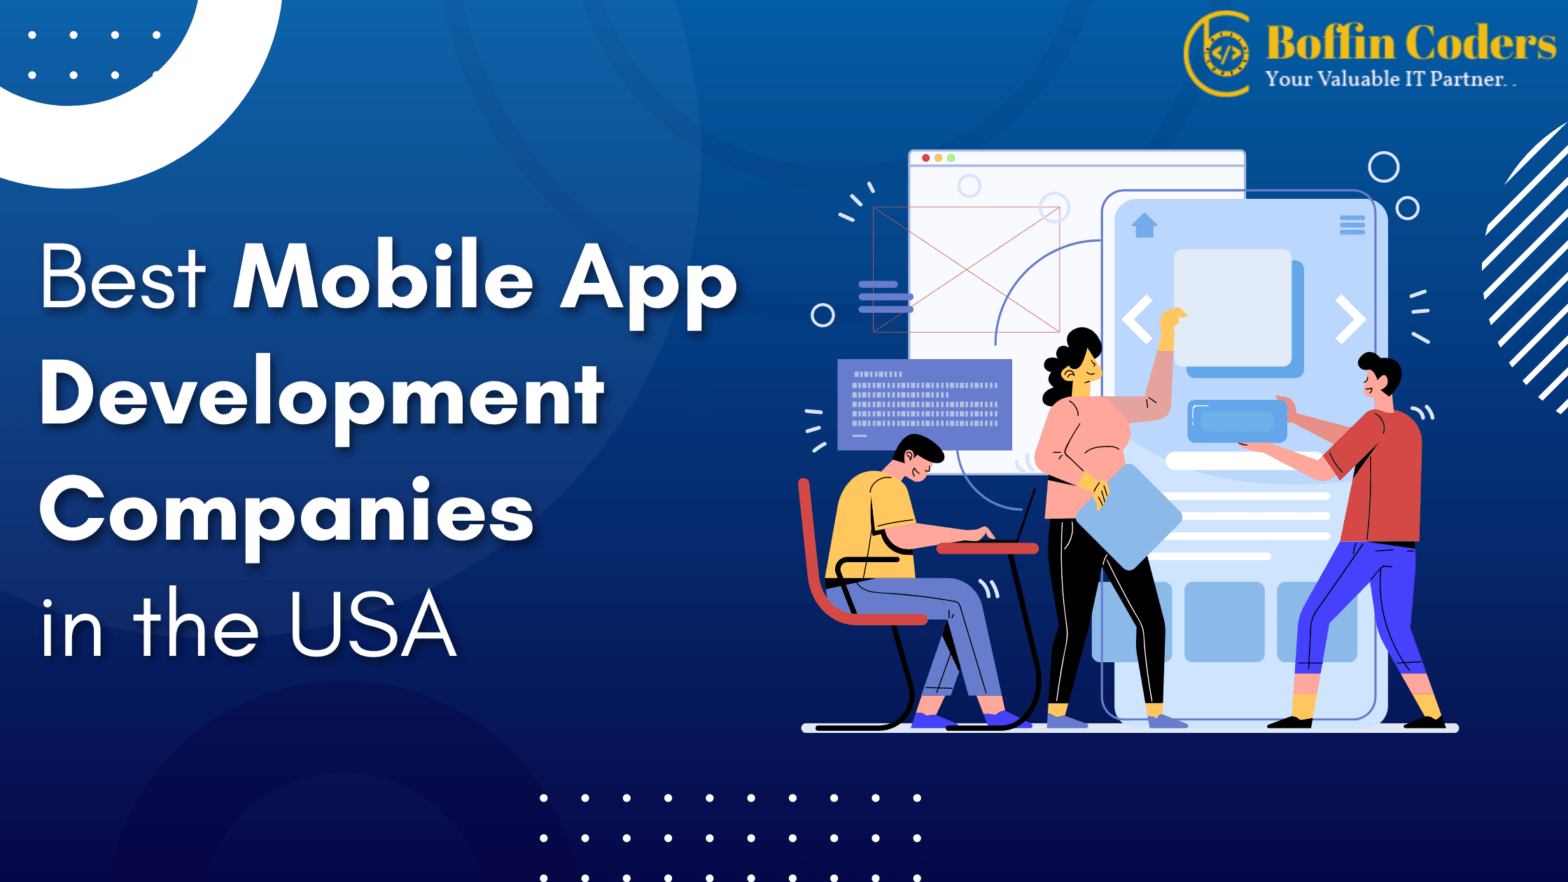 Best Mobile App Development Companies in the USA